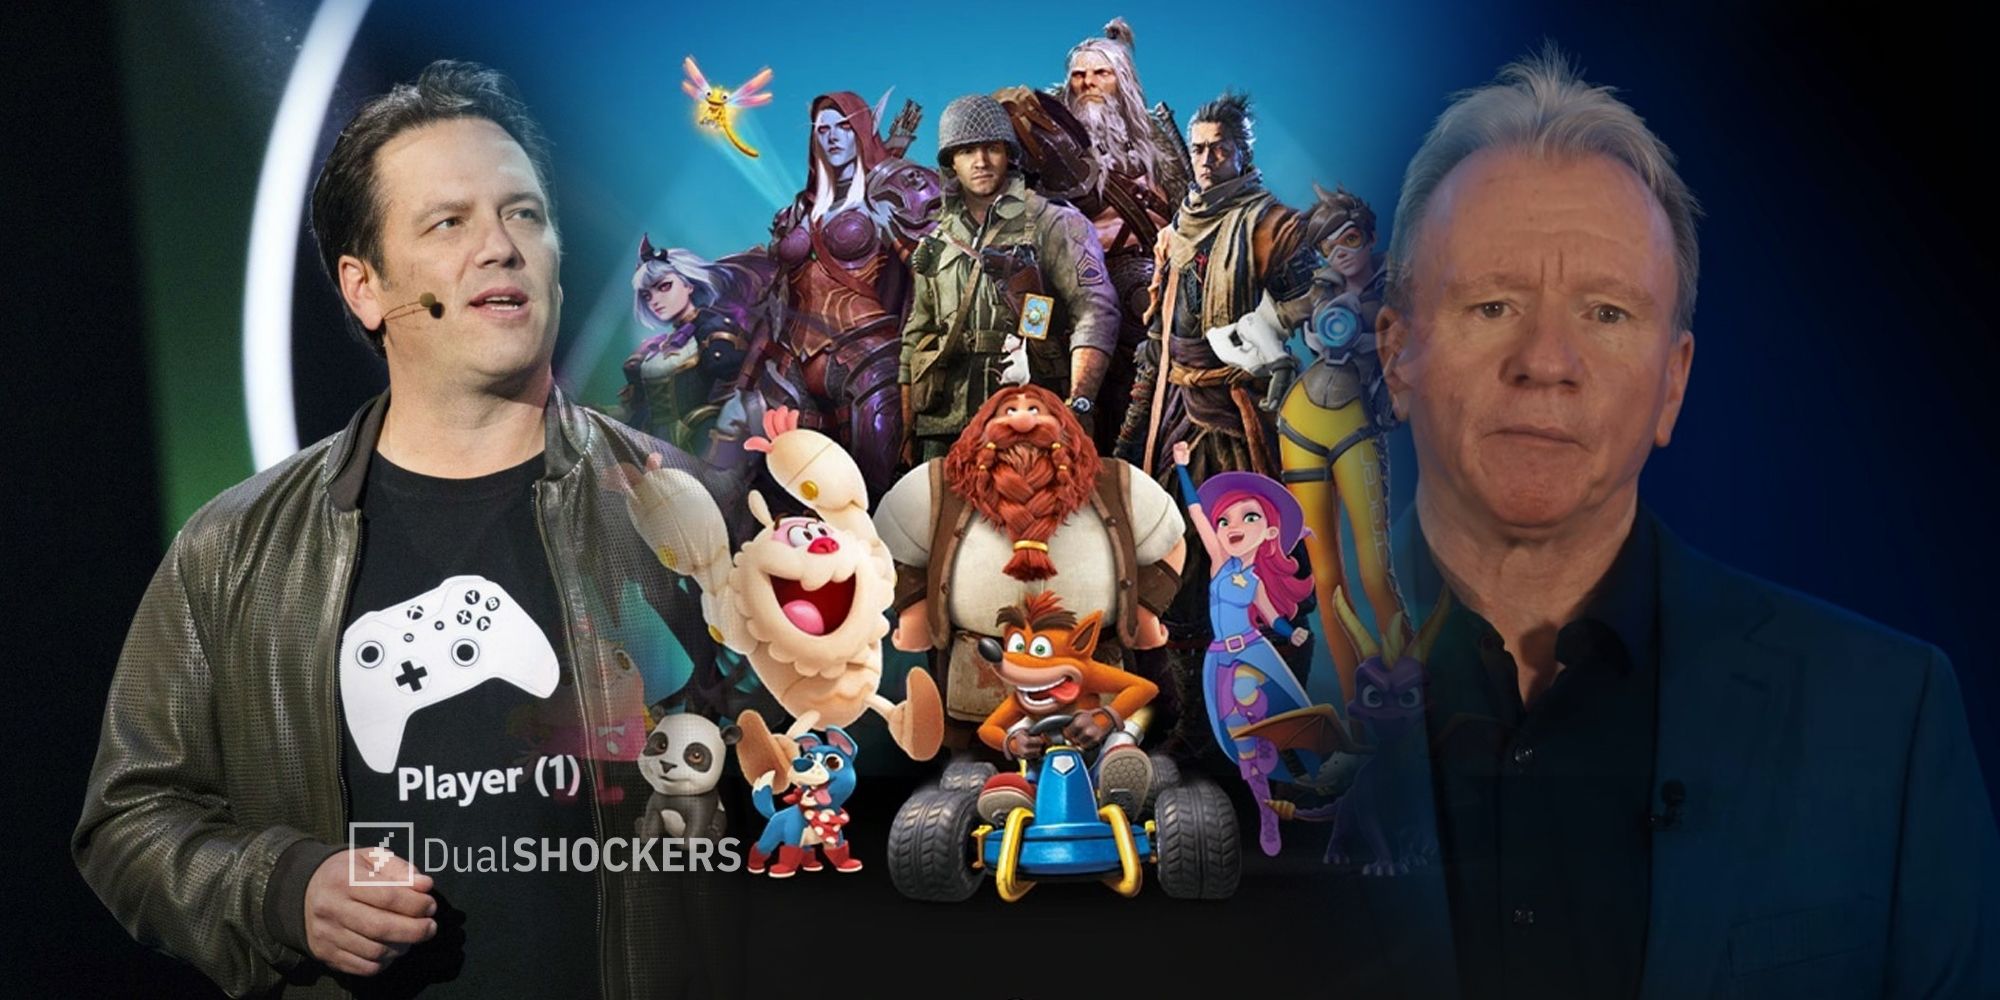 Phil Spencer of Xbox and Jim Ryan of Playstation with Activision Blizzard characters